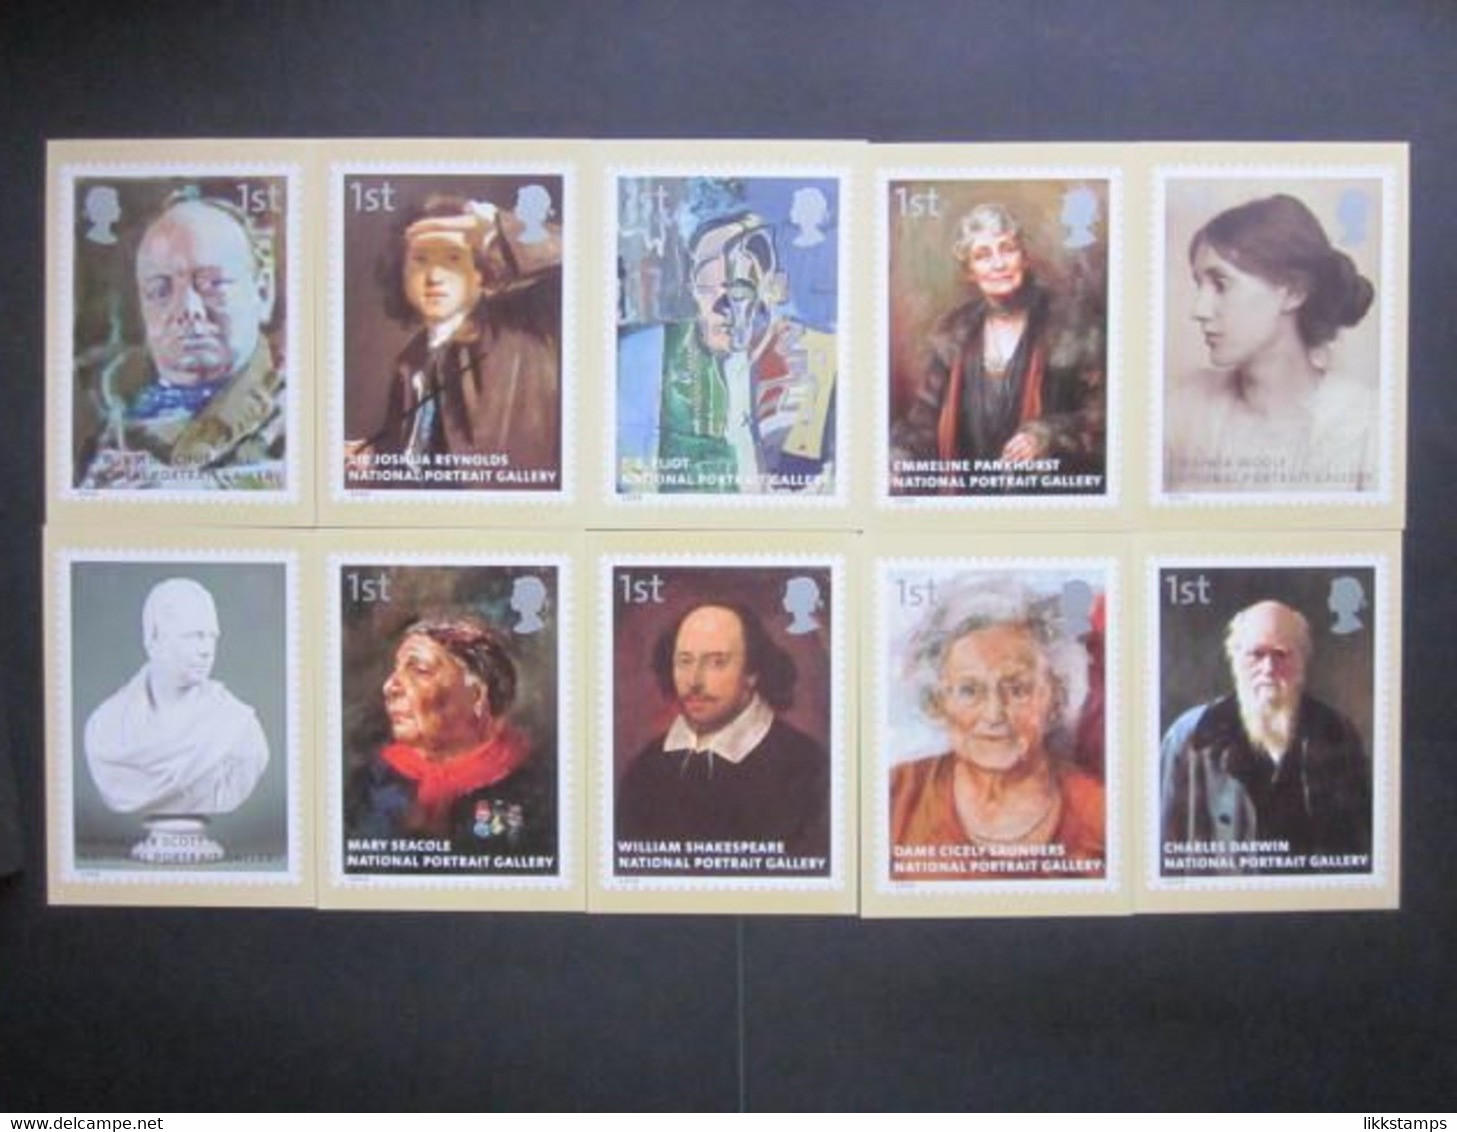 2006 THE NATIONAL PORTRAIT GALLERY, LONDON P.H.Q. CARDS UNUSED, ISSUE No. 289 (B) #00742 - Cartes PHQ